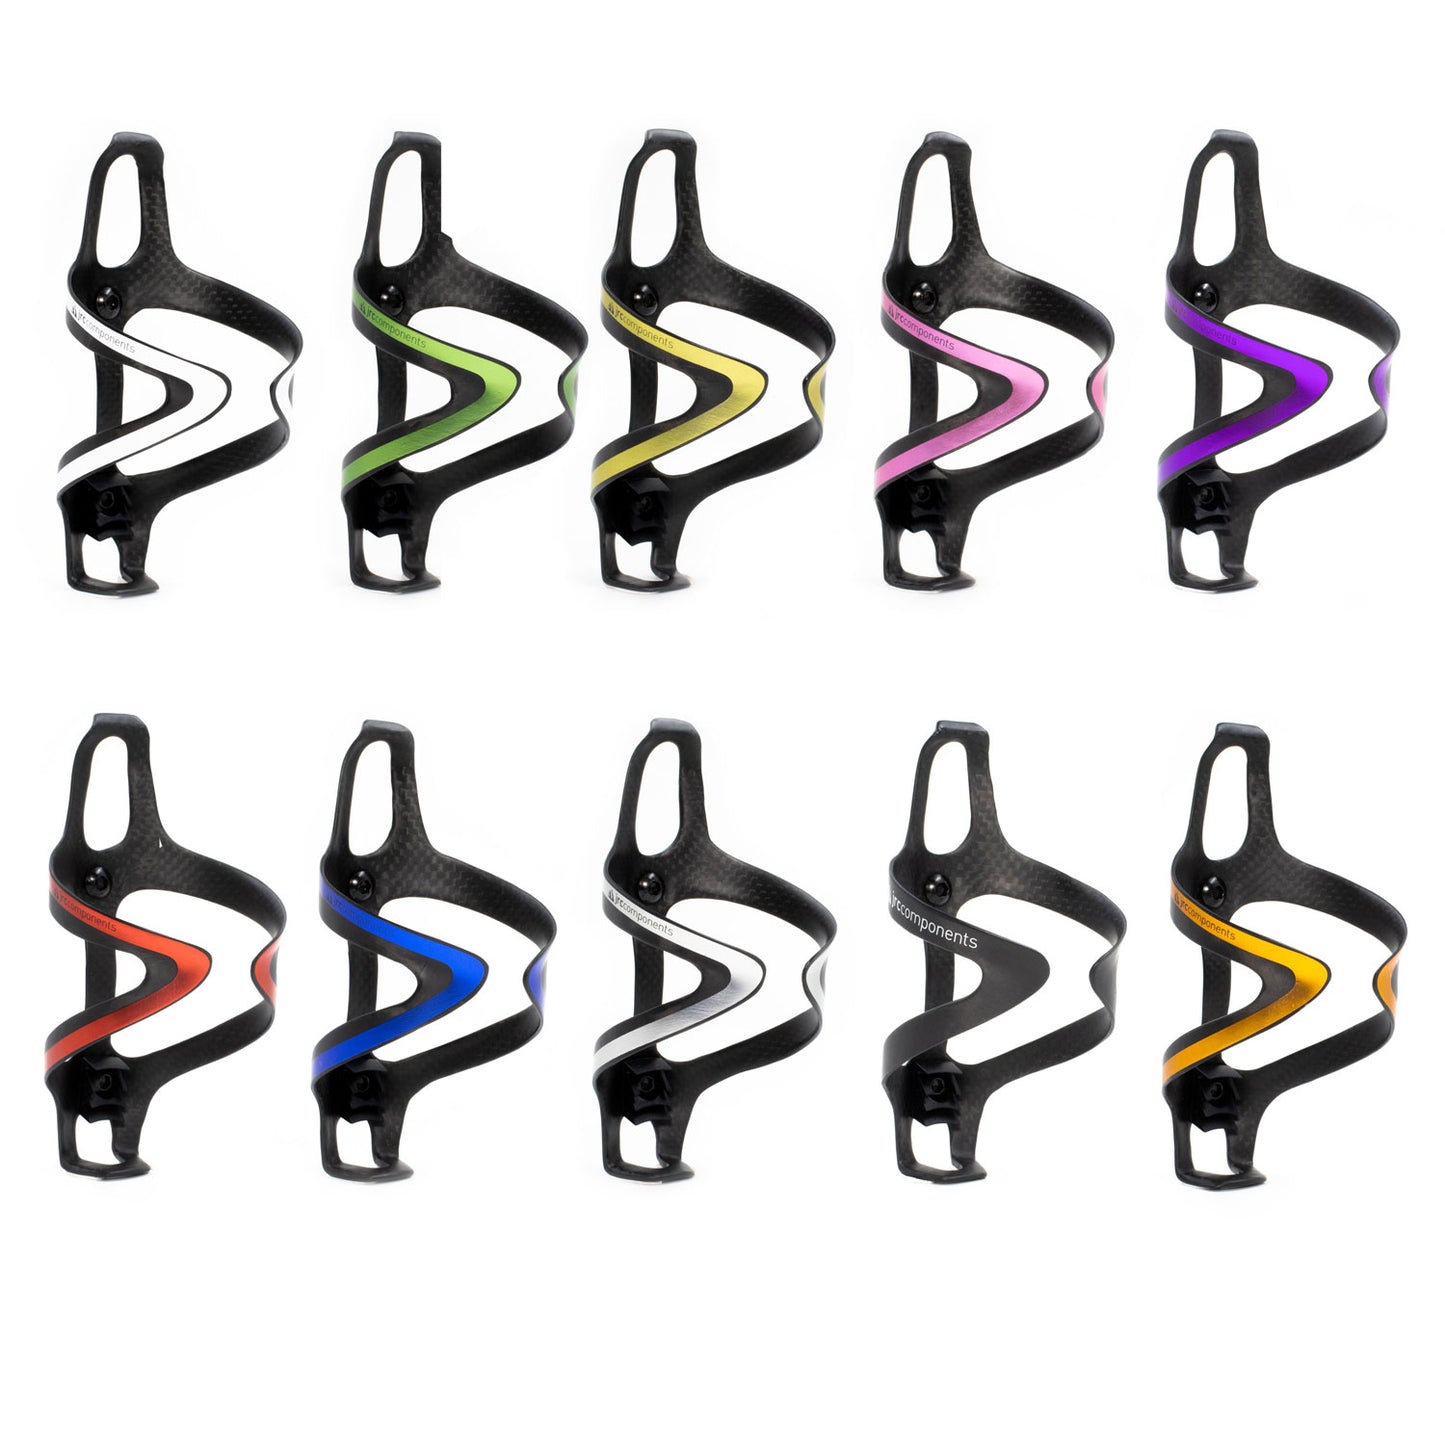 Carbon fibre bottle cages in various metallic colours with gloss or matt finish